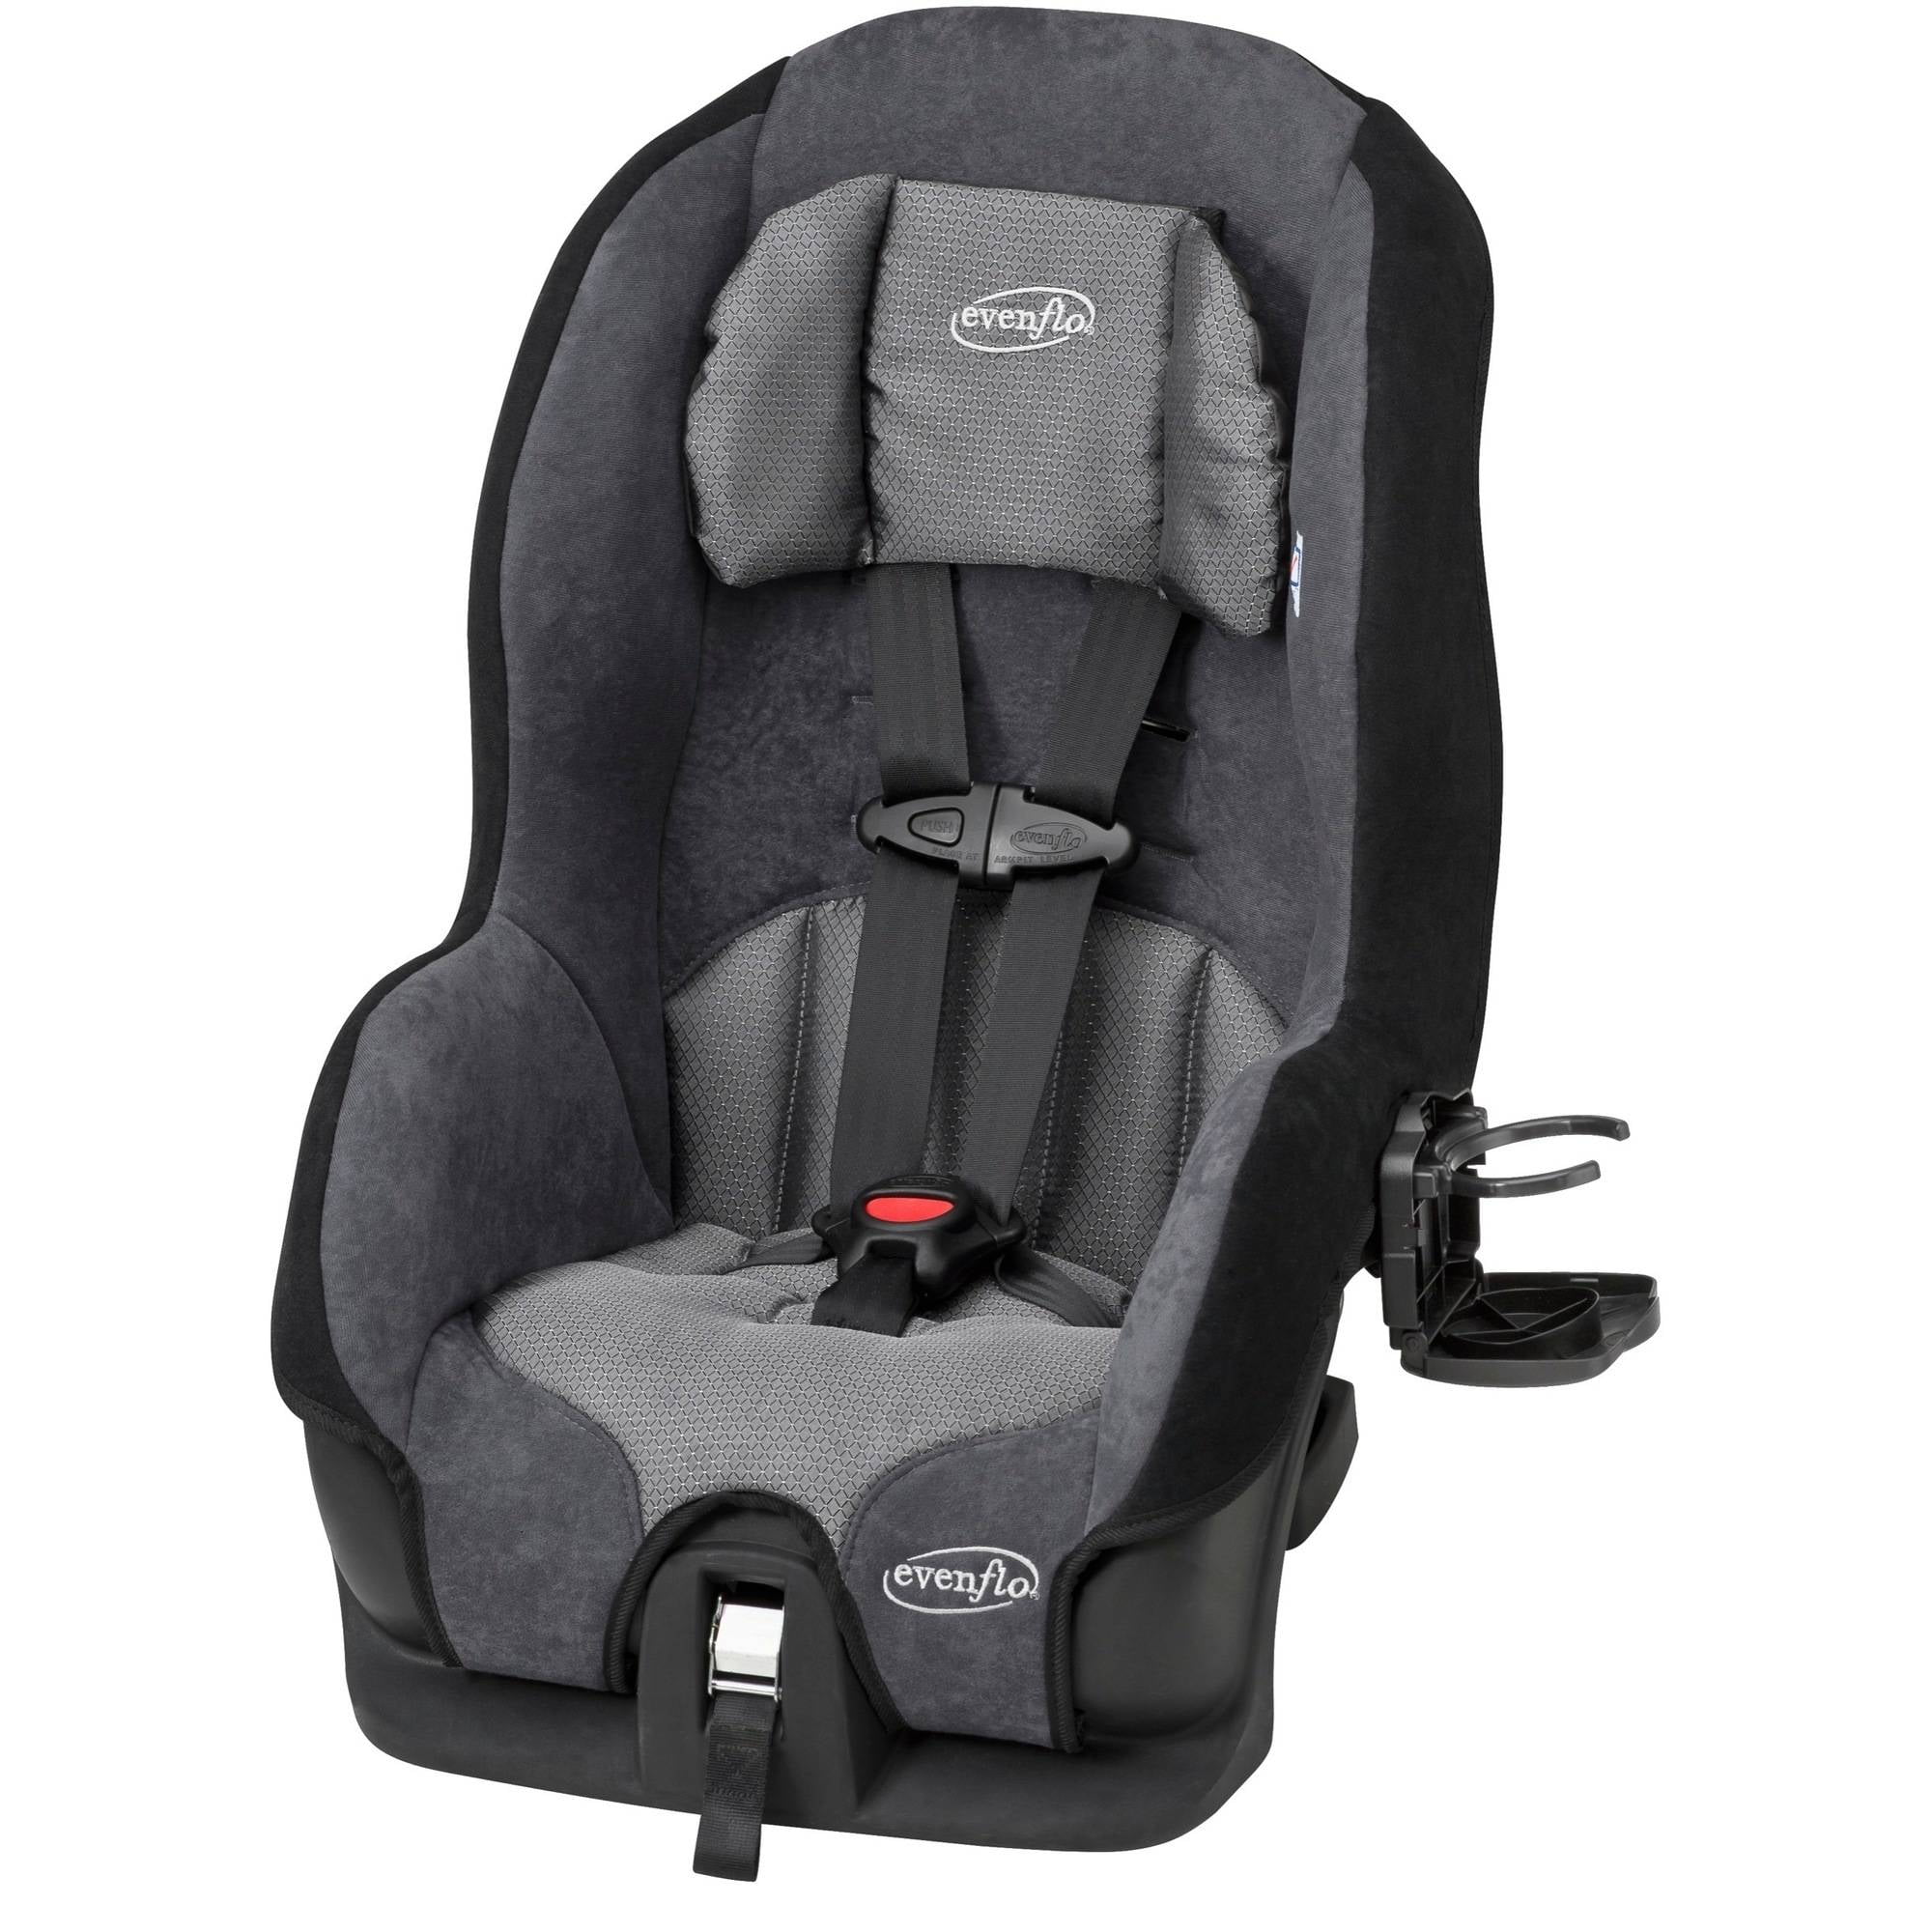 Photo 1 of Evenflo Tribute LX Harness Convertible Car Seat, Solid Print Gray
** HAS DIRT **